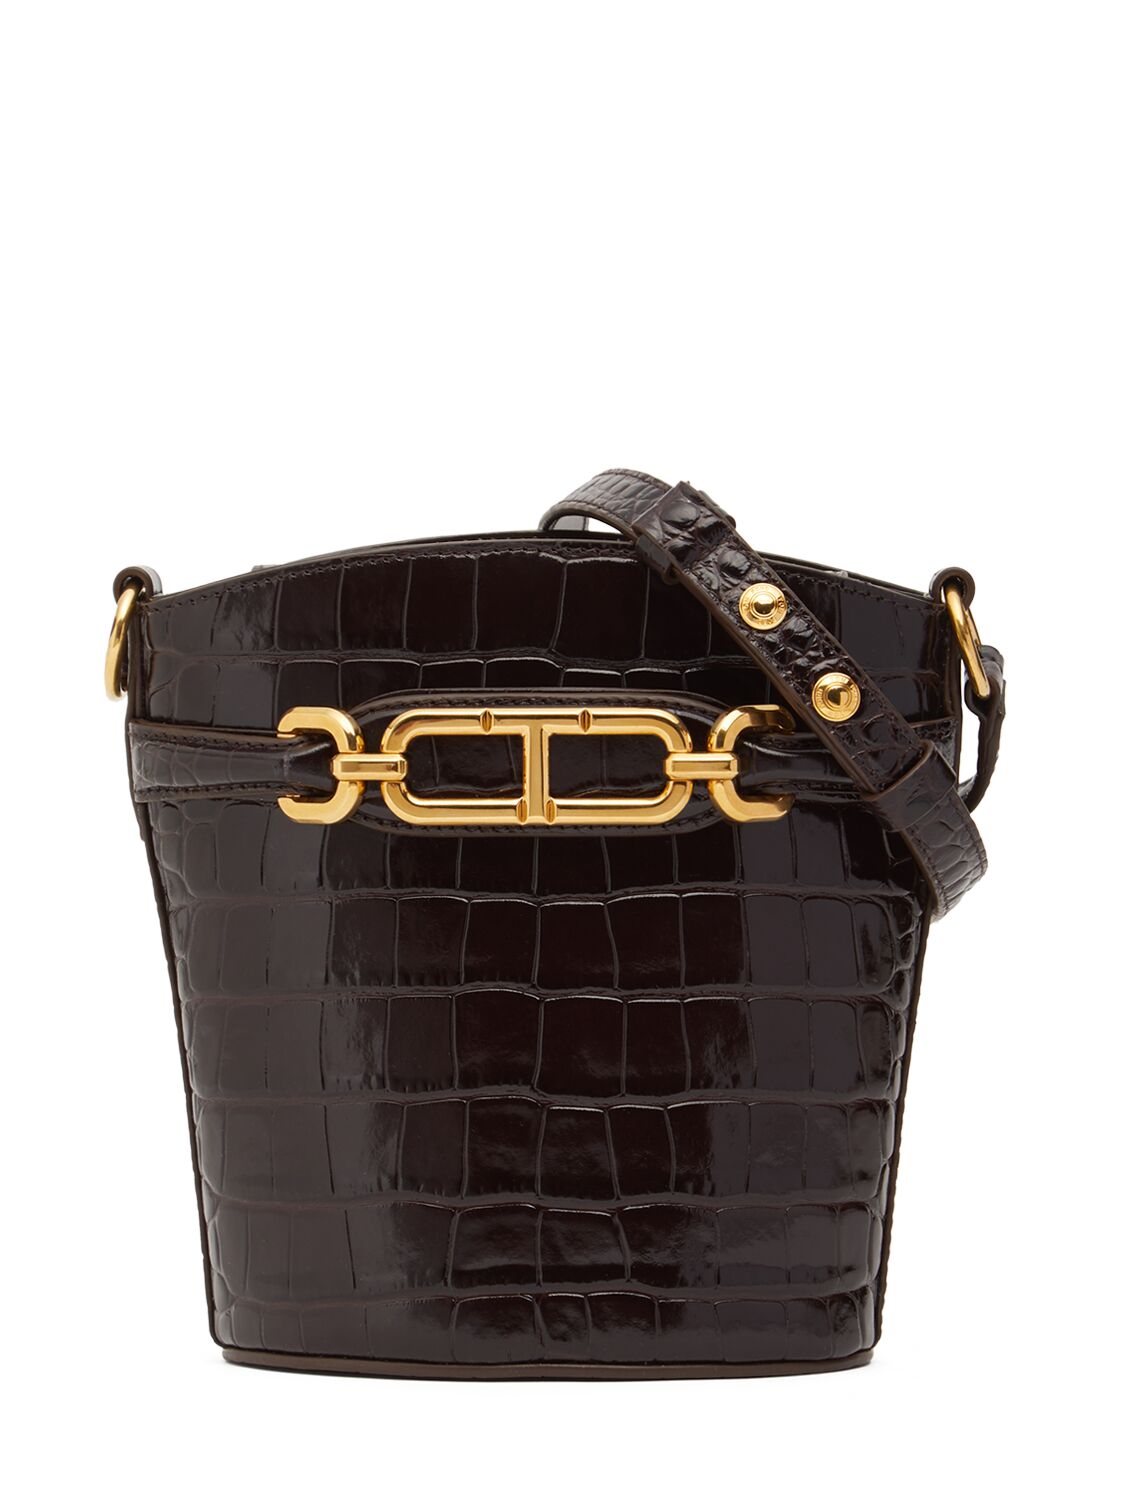 Tom Ford Small Shiny Stamped Croc Bucket Bag In Espresso